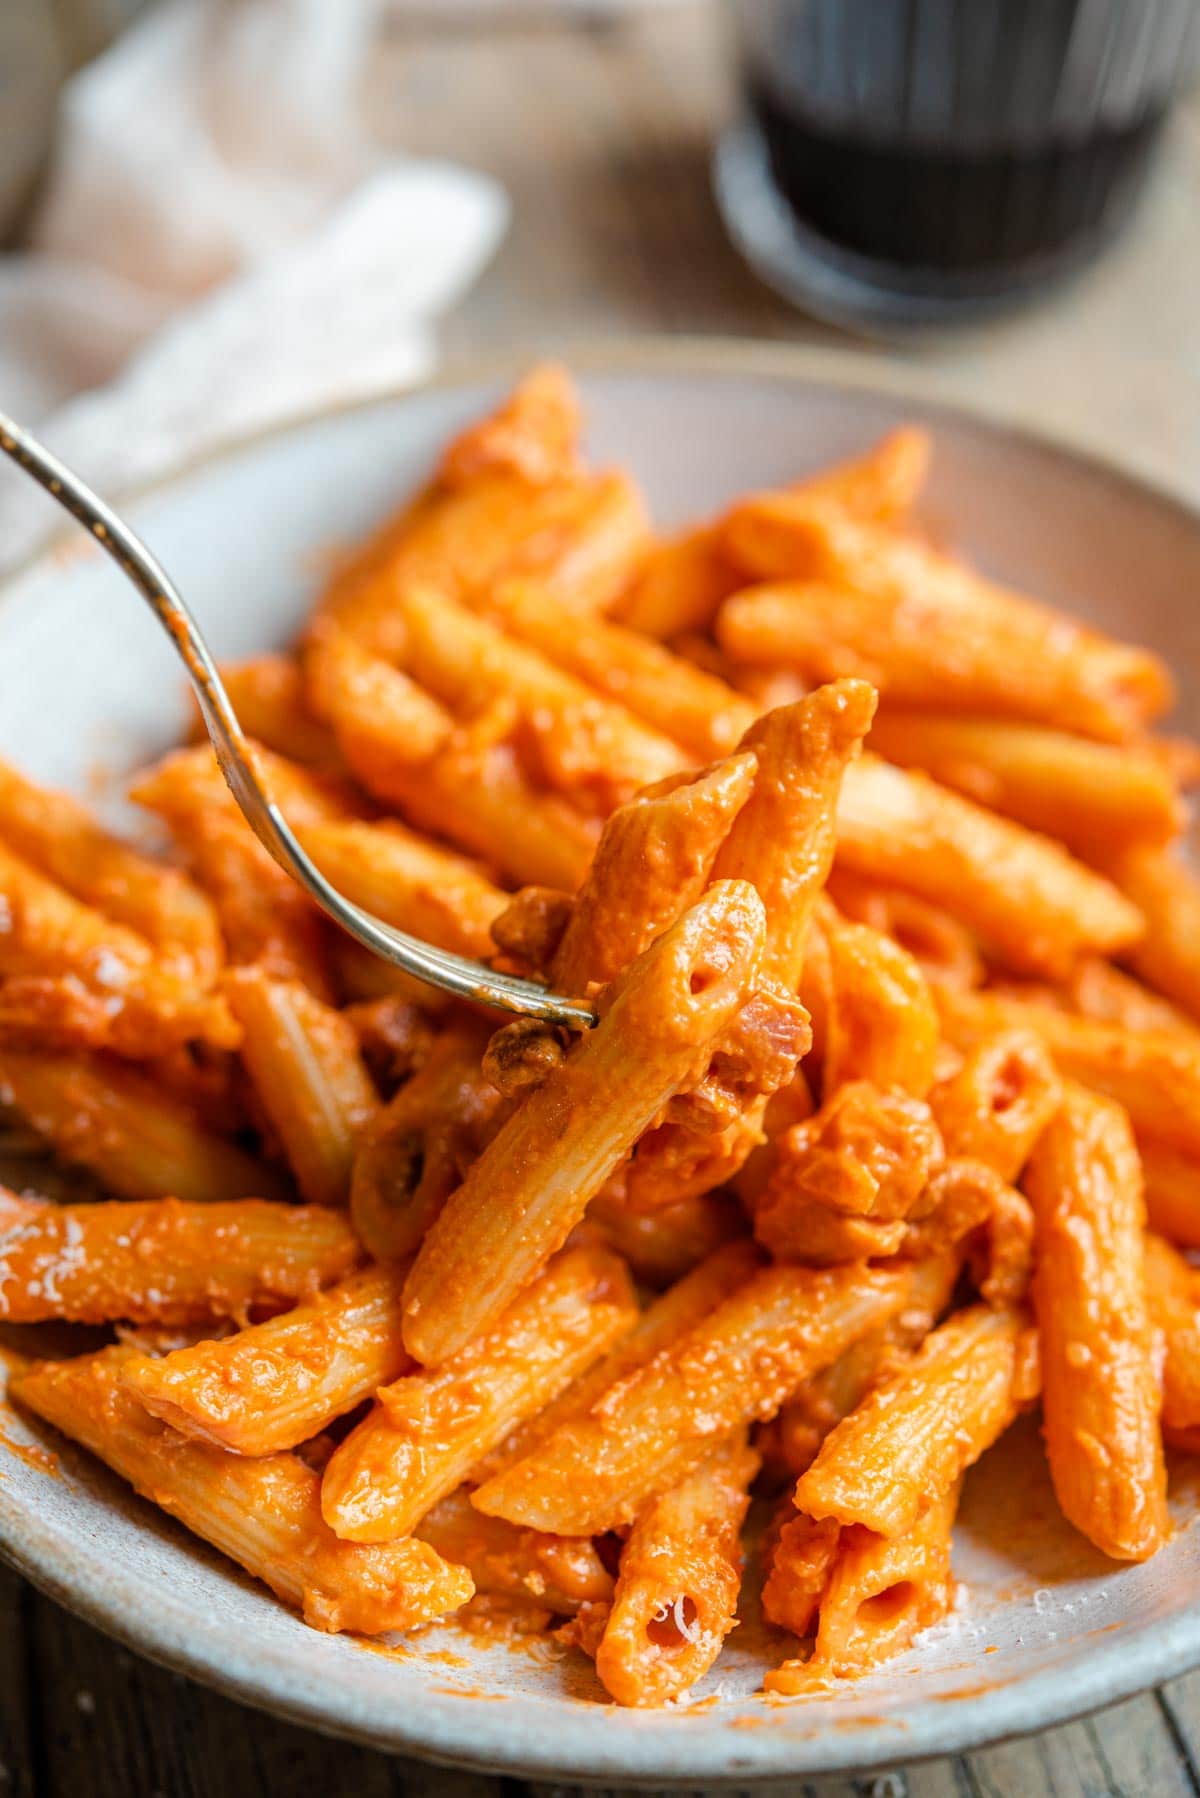 A close up of a fork picking up pasta with a tomato vodka sauce